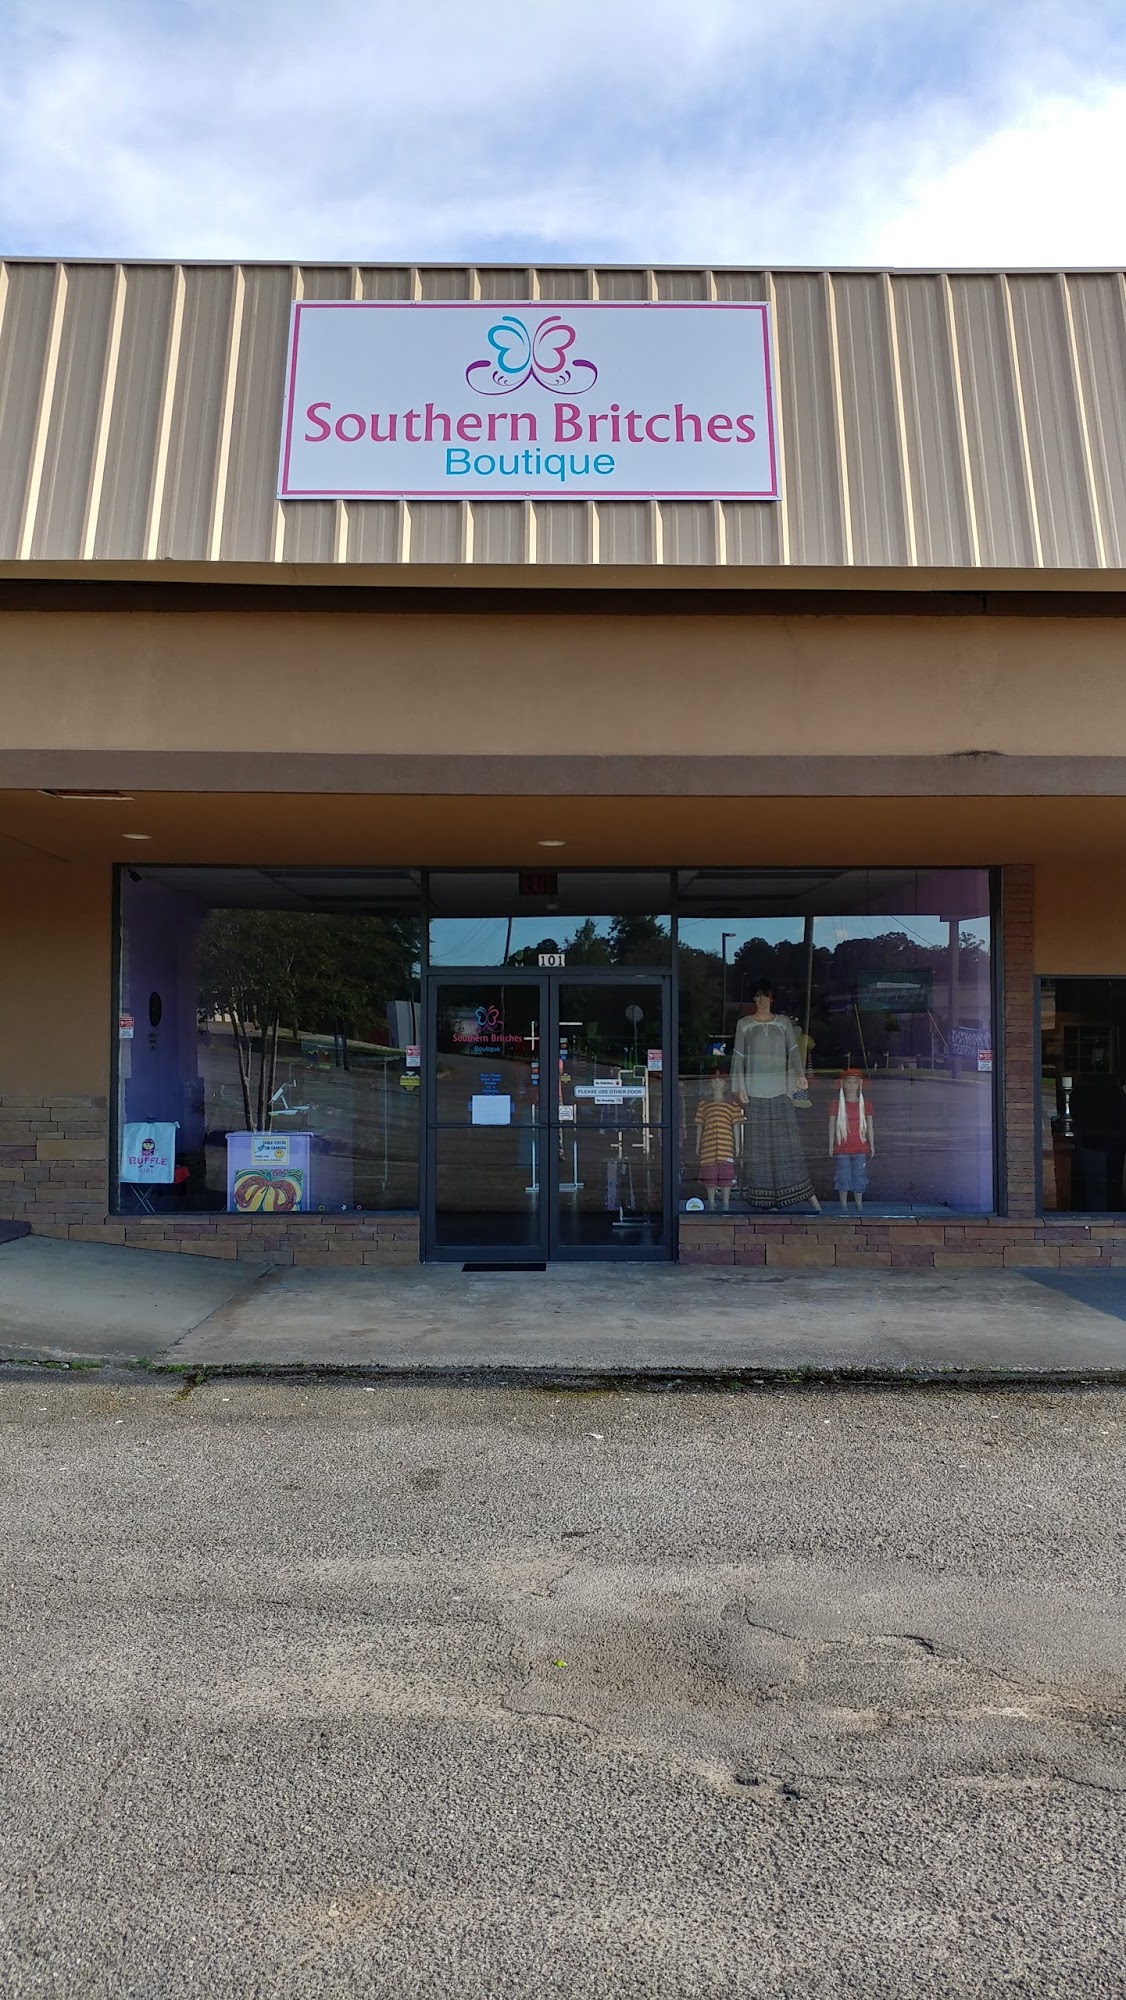 Southern Britches Boutique